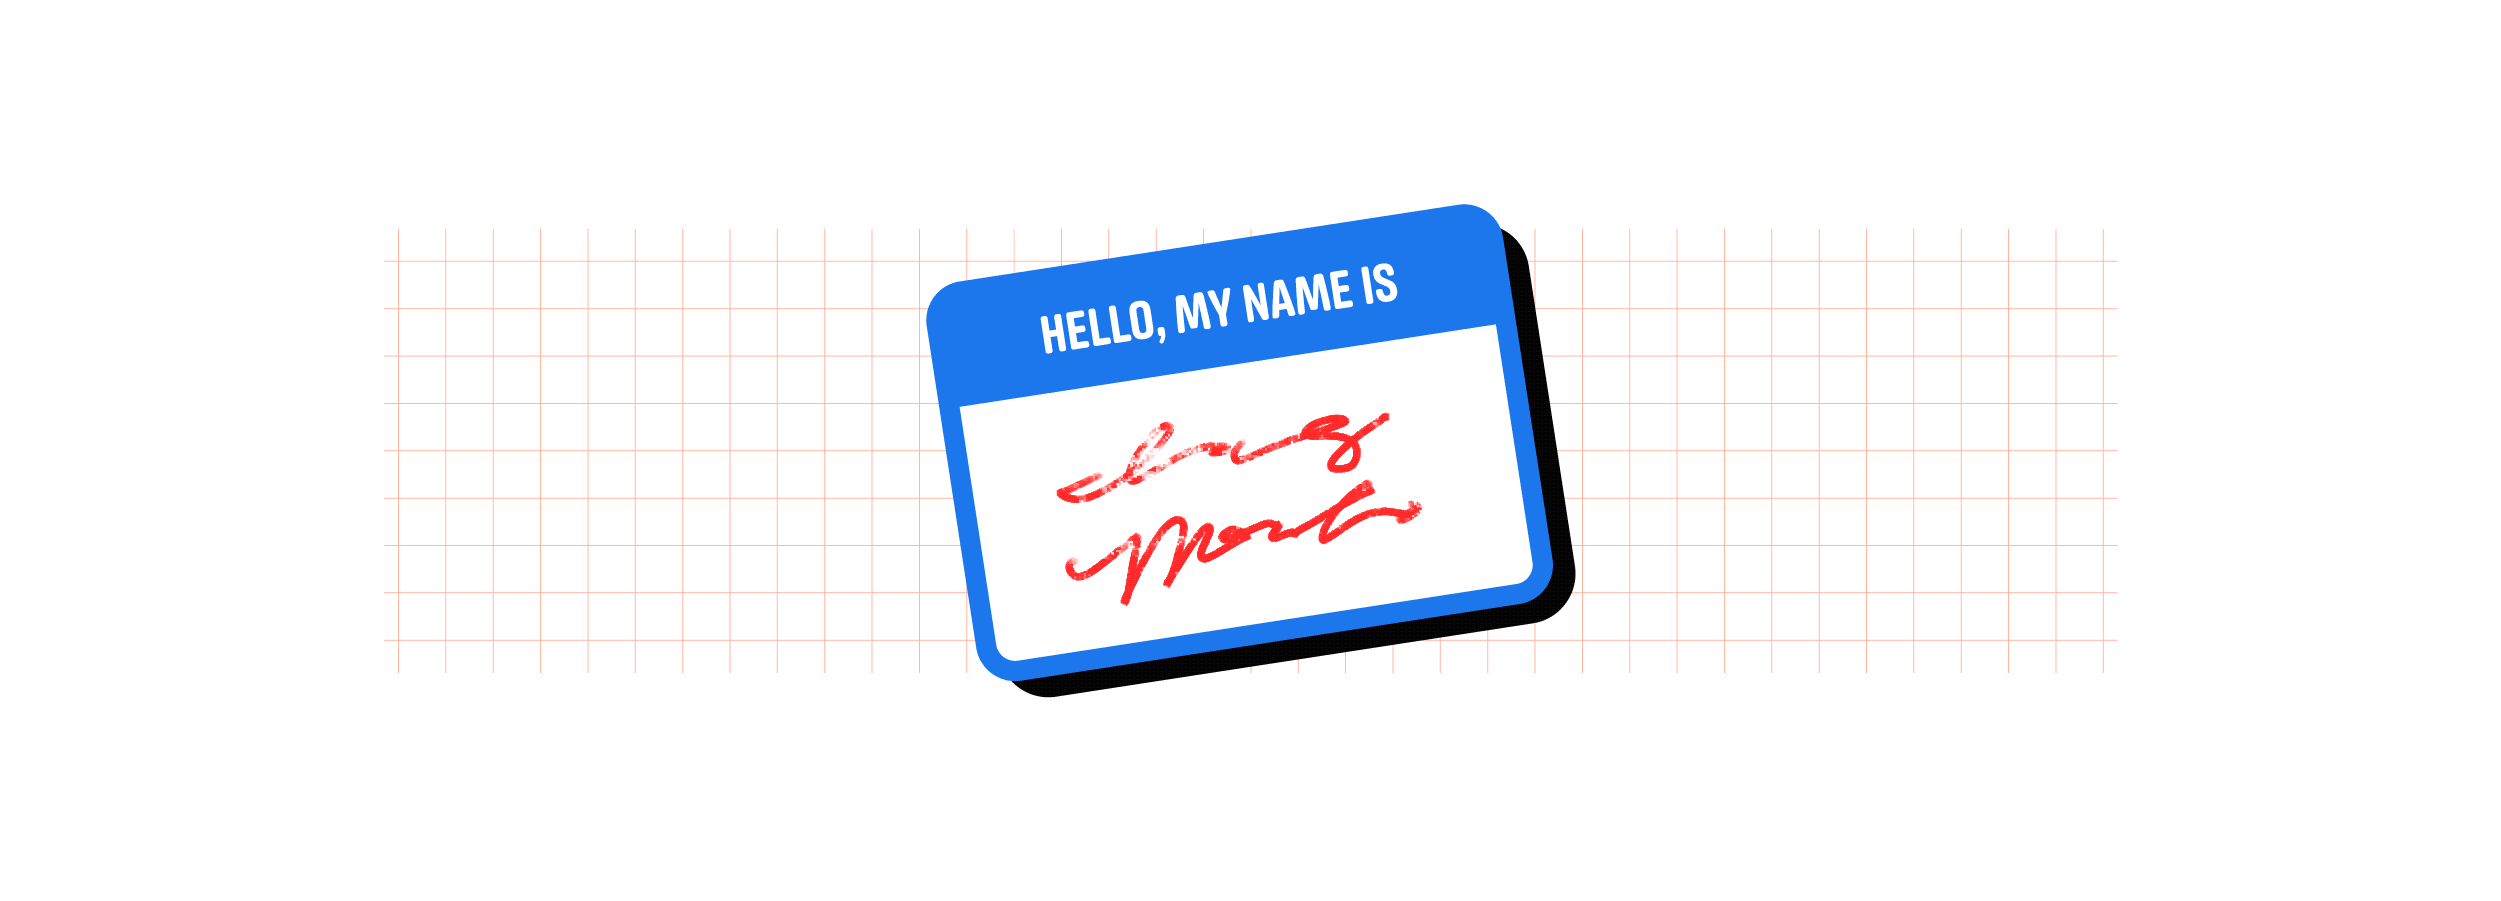 Name tag sticker that reads “Hello, my name is” with someone’s name written in on the bottom